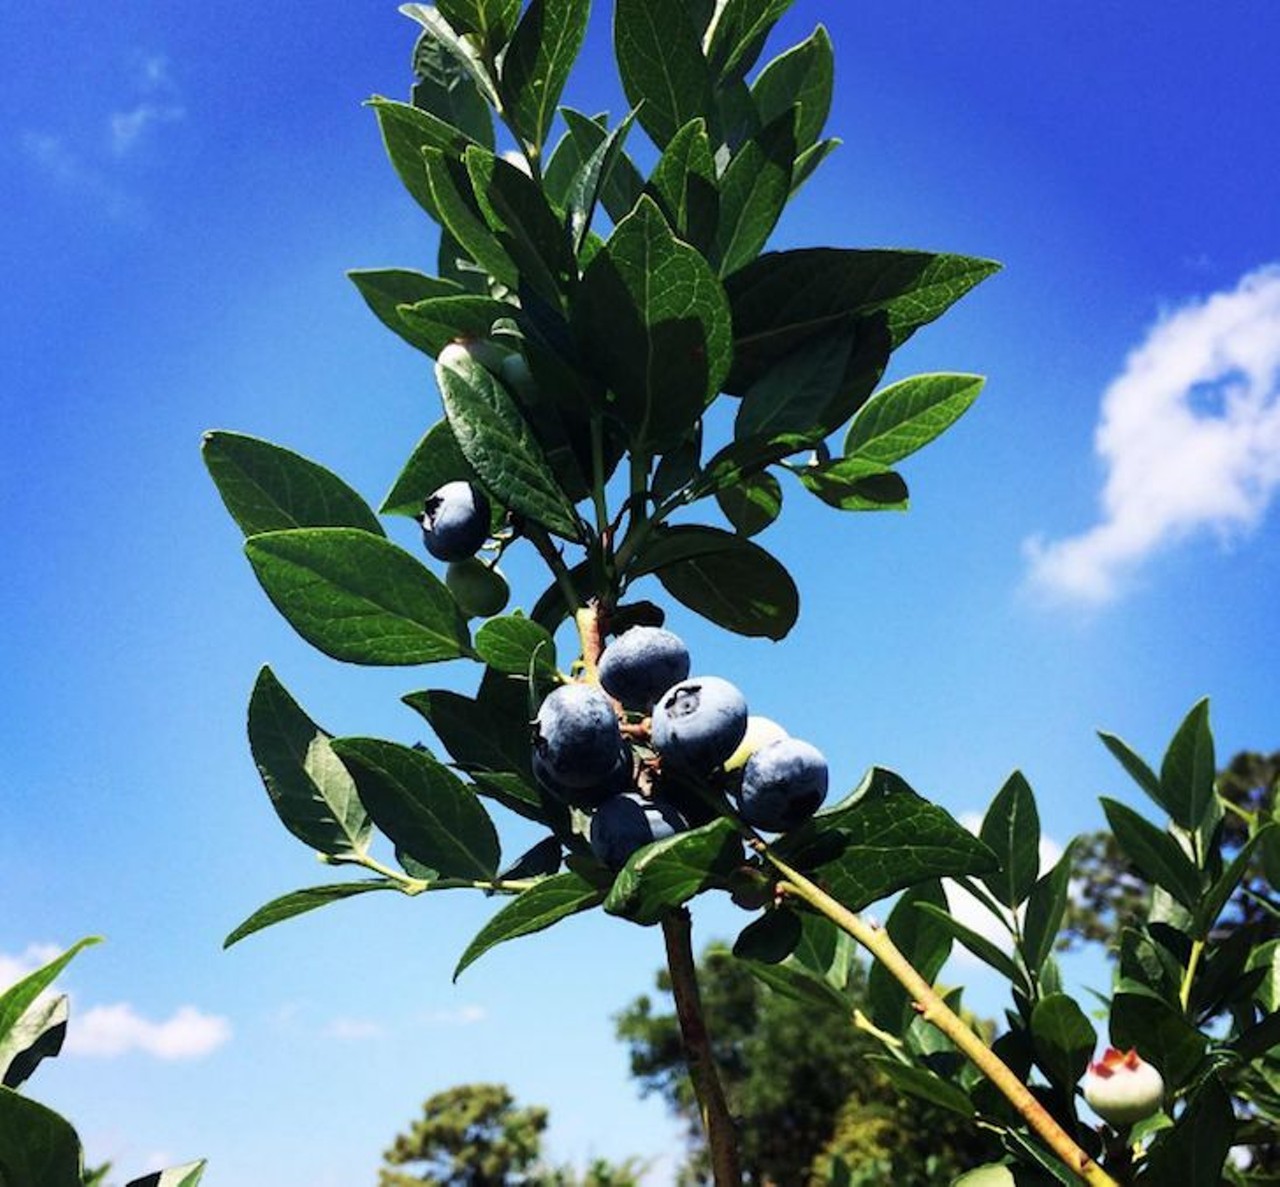 A Patch of Blue
2316 Carrington Dr., 321-438-0820
You&#146;ll want to stay up-to-date on this urban farm by following their social media for the days and times they are open for u-pick season. Check out their blueberries marked at $5 per pound.
Distance from Orlando: 17 minutes
Photo via A Patch of Blue/Instagram